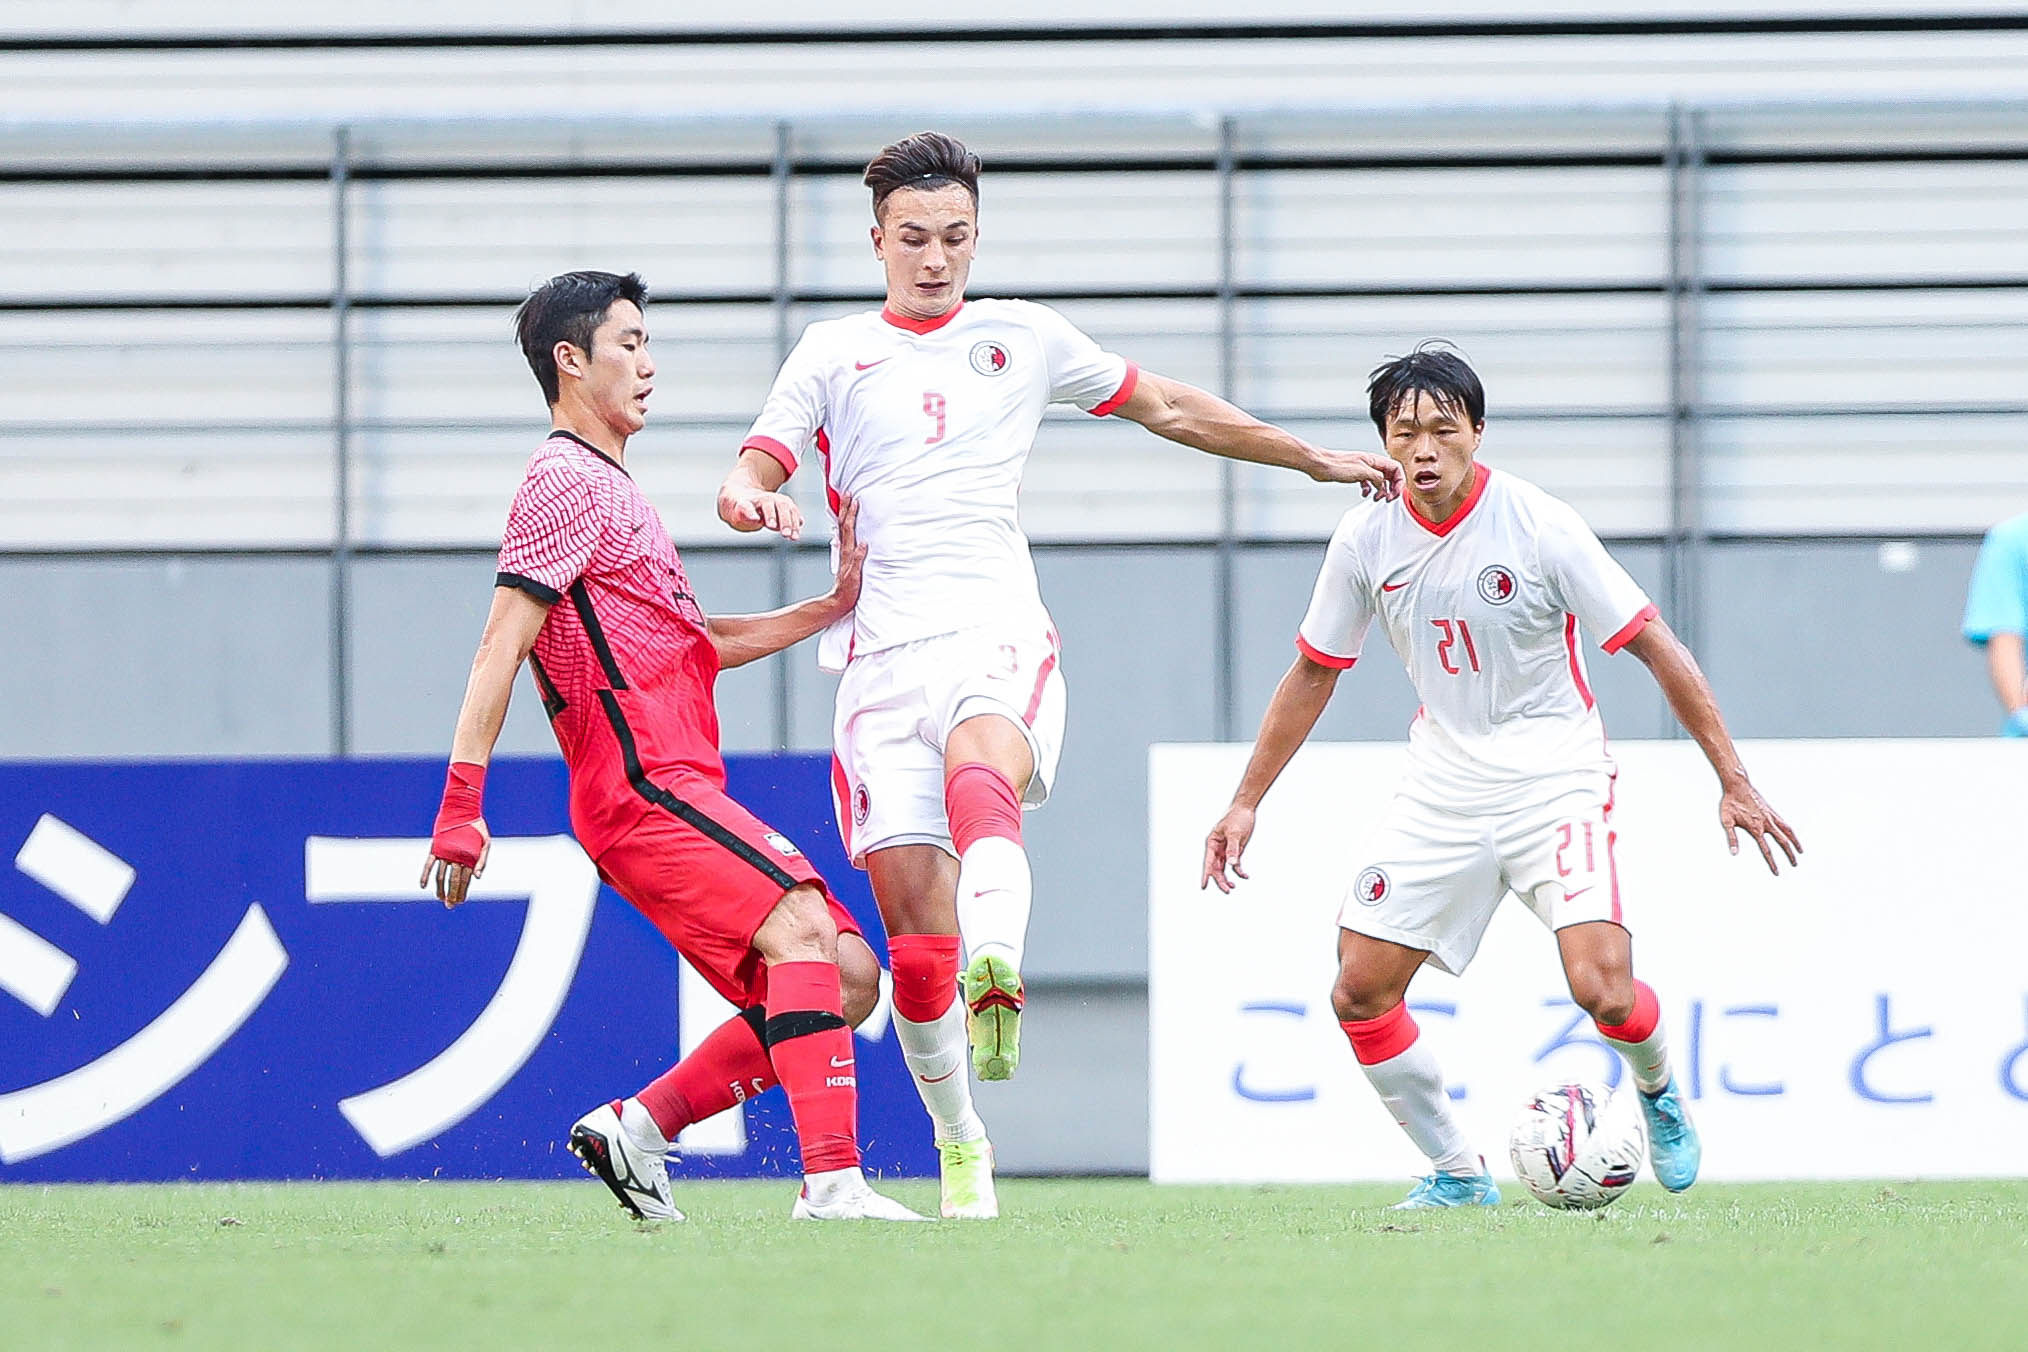 Hong Kong striker Matthew Orr (centre) battles for the ball during his side’s East Asian Football Championship game against South Korea. Photo: HKFA